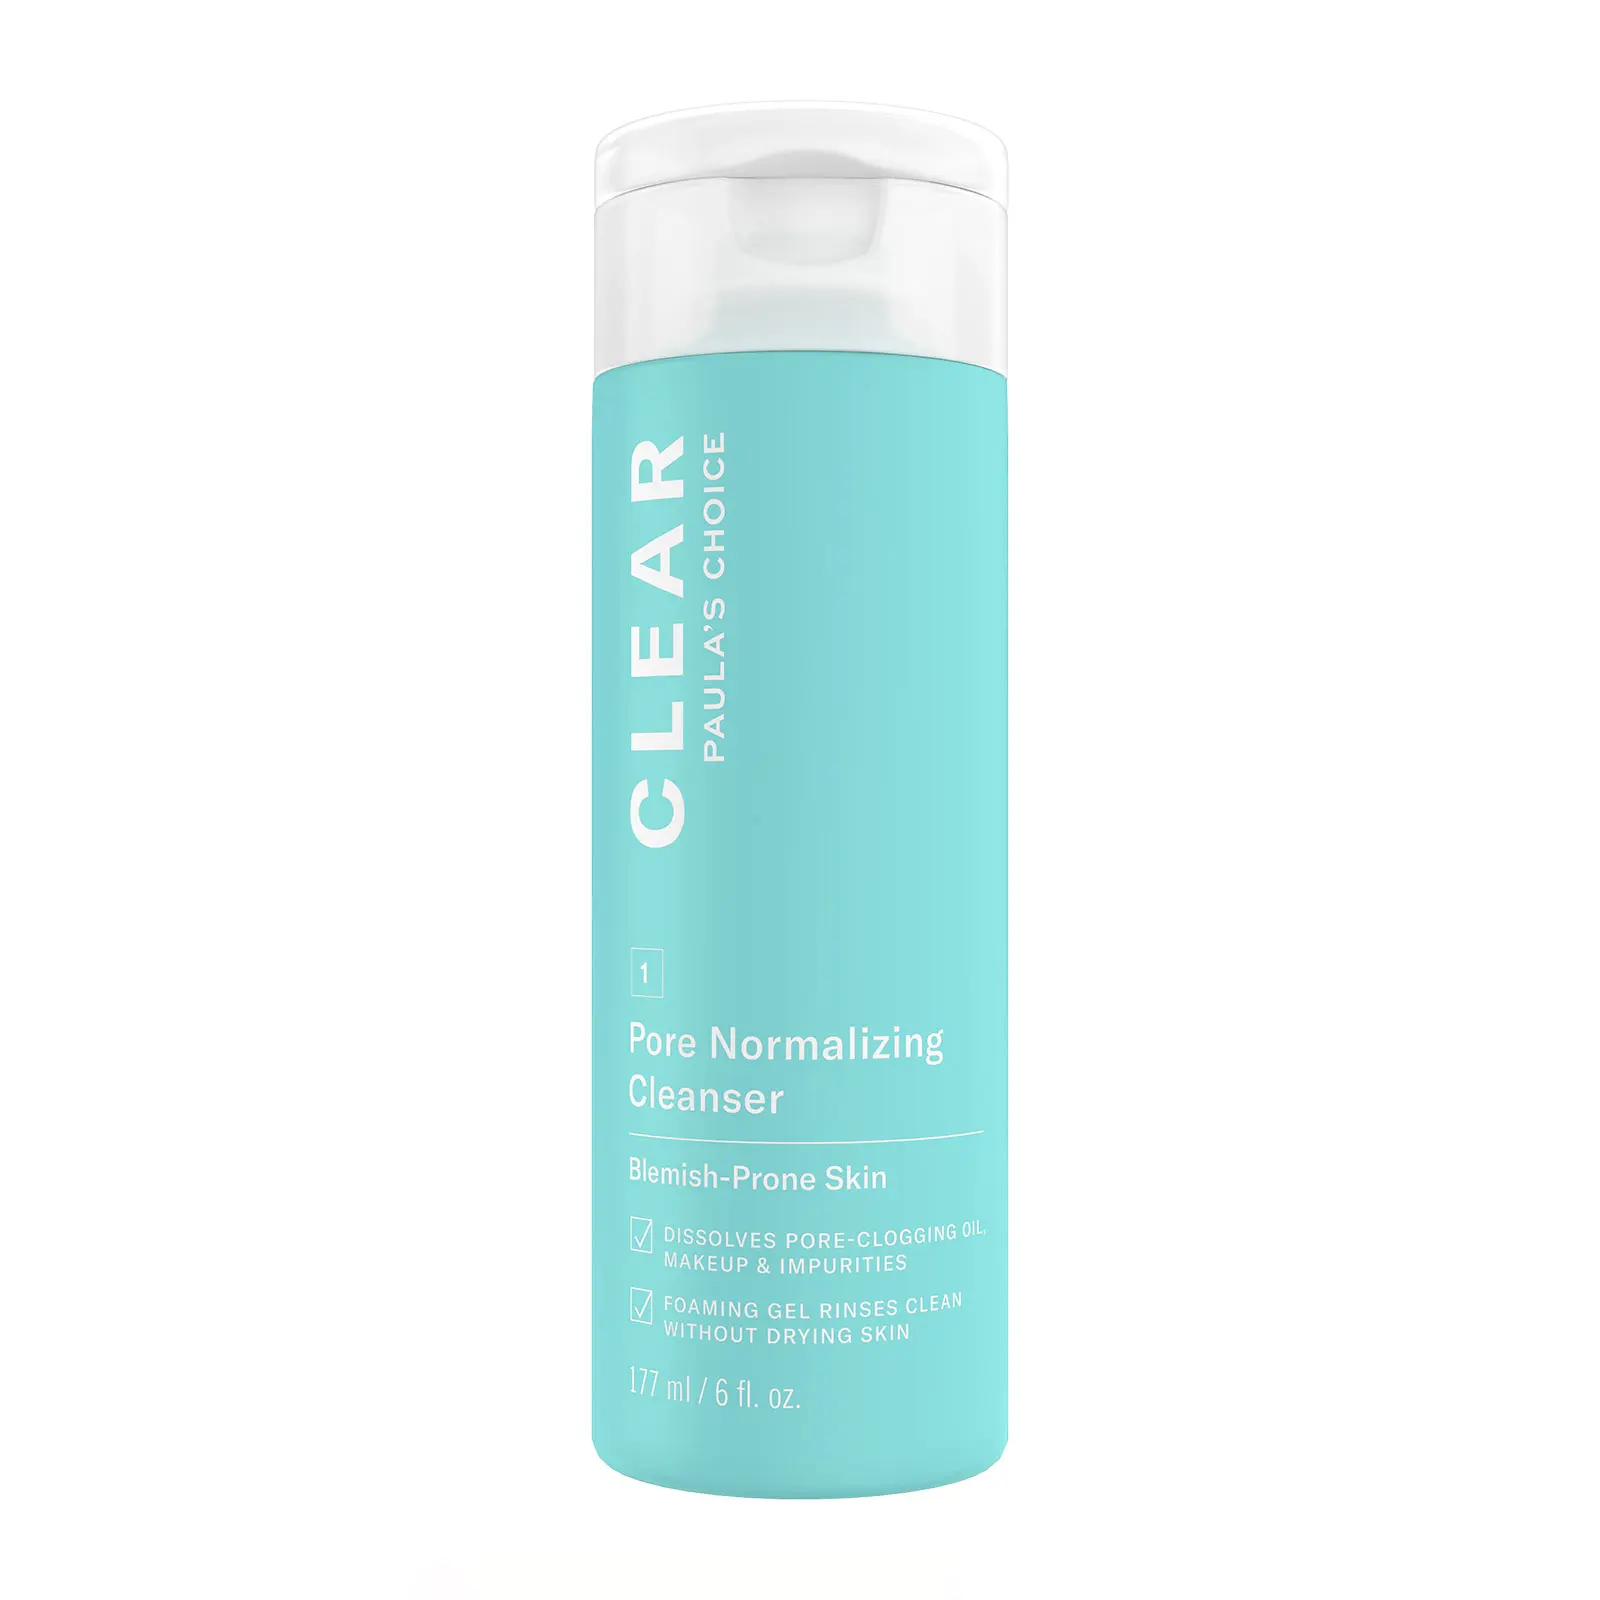 Paula's Choice Clear Pore Normalizing Cleanser Discounts and Cashback